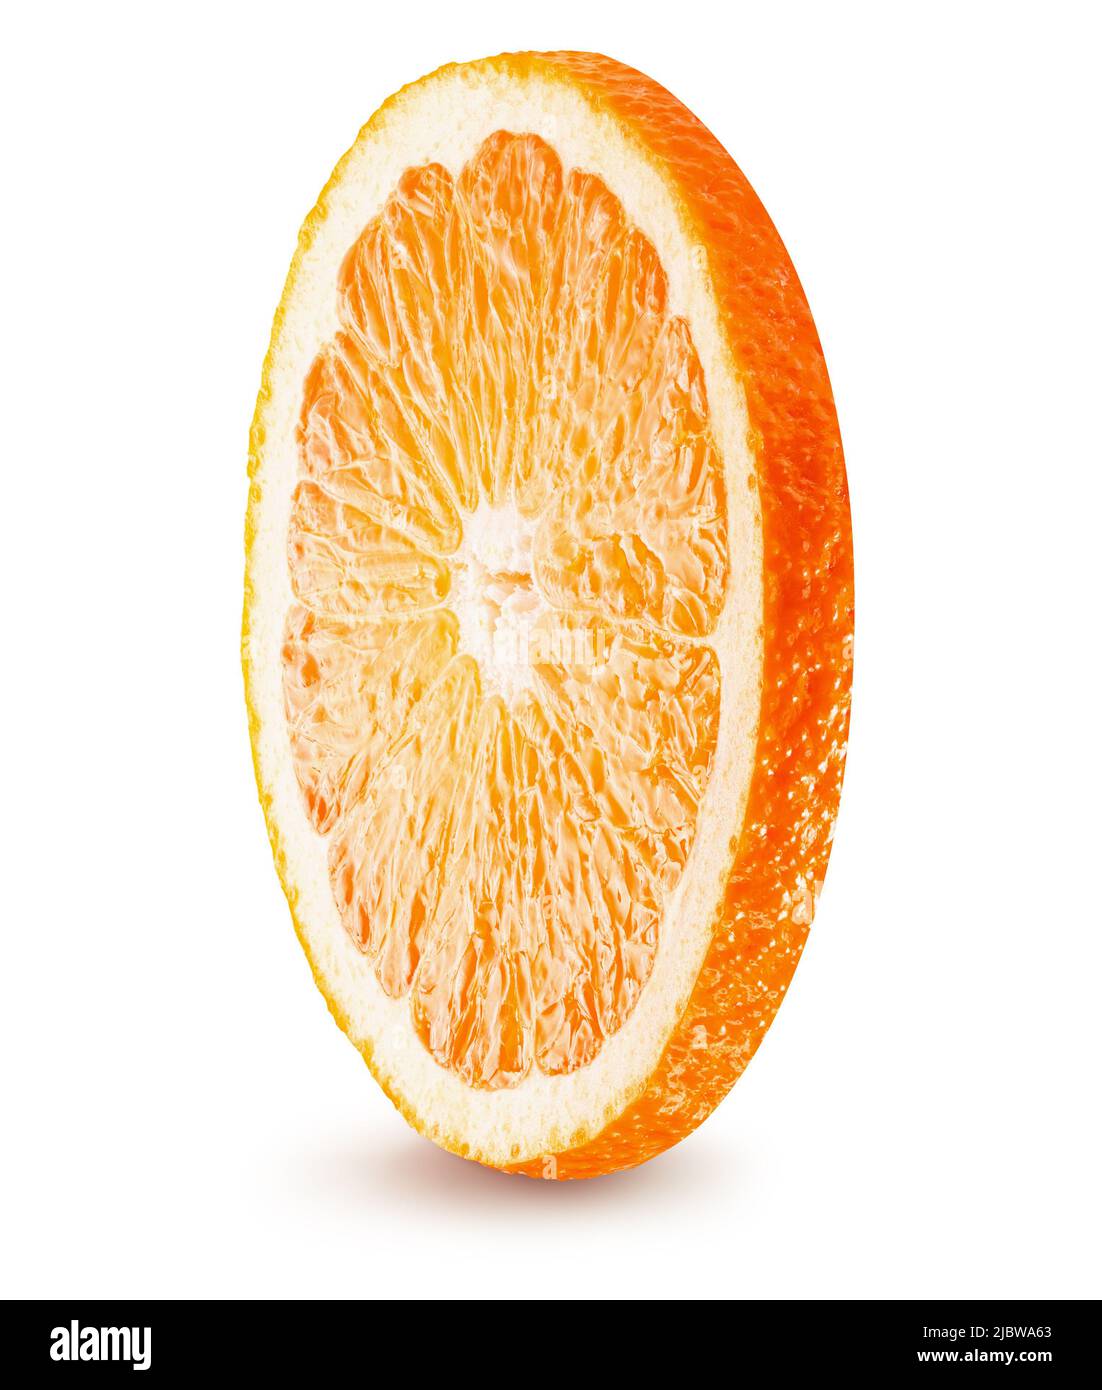 orange slice isolated on a white background with clipping path. Stock Photo